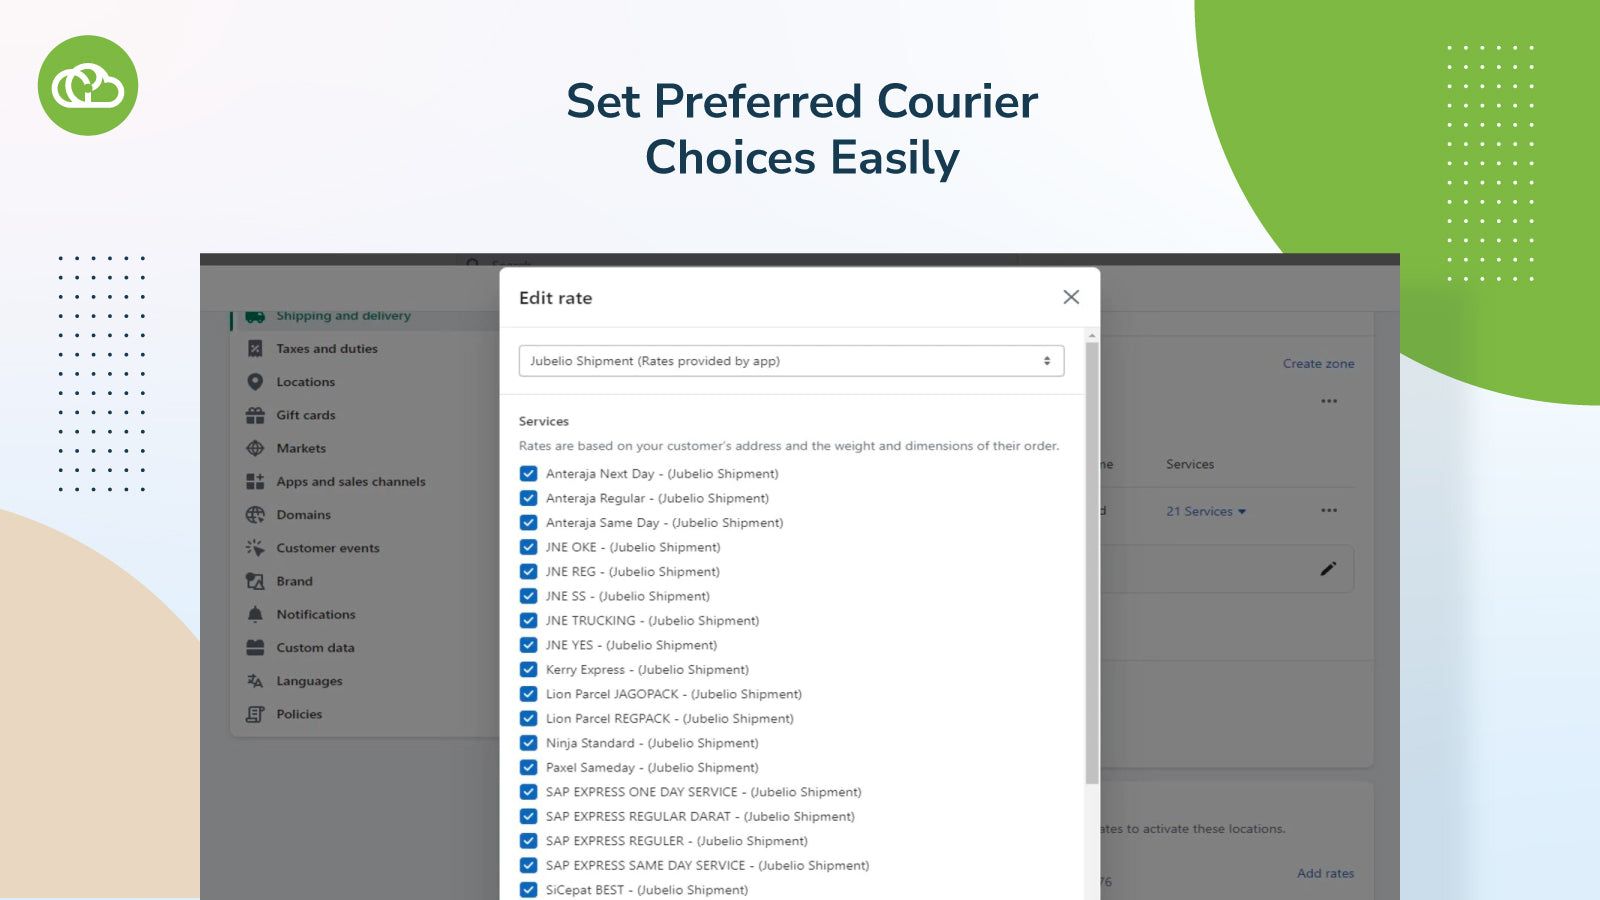 Set preferred courier choices easily